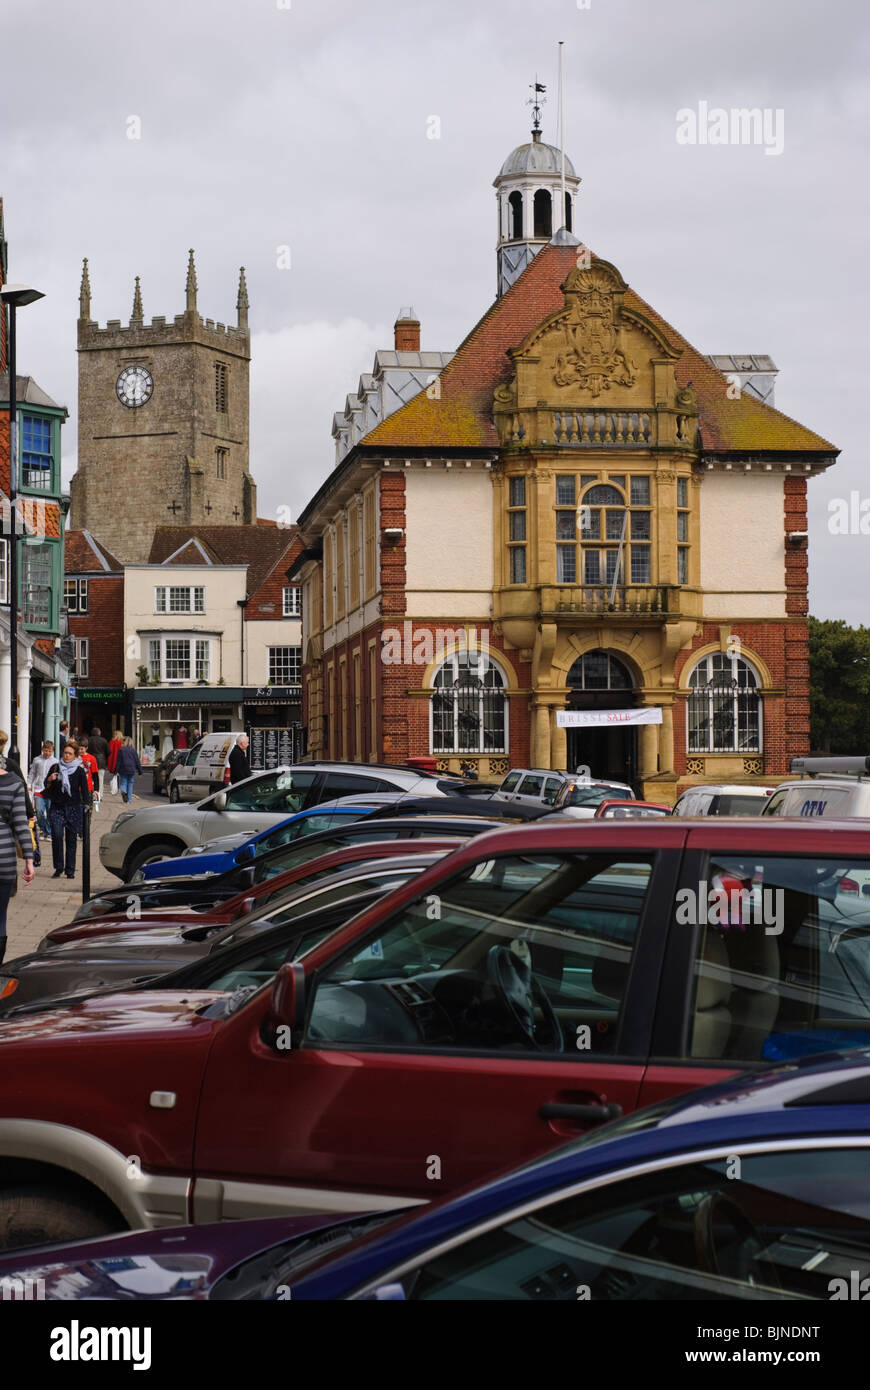 The view from Marlborough High St of the Town Hall with St Mary's Church in the background. Stock Photo